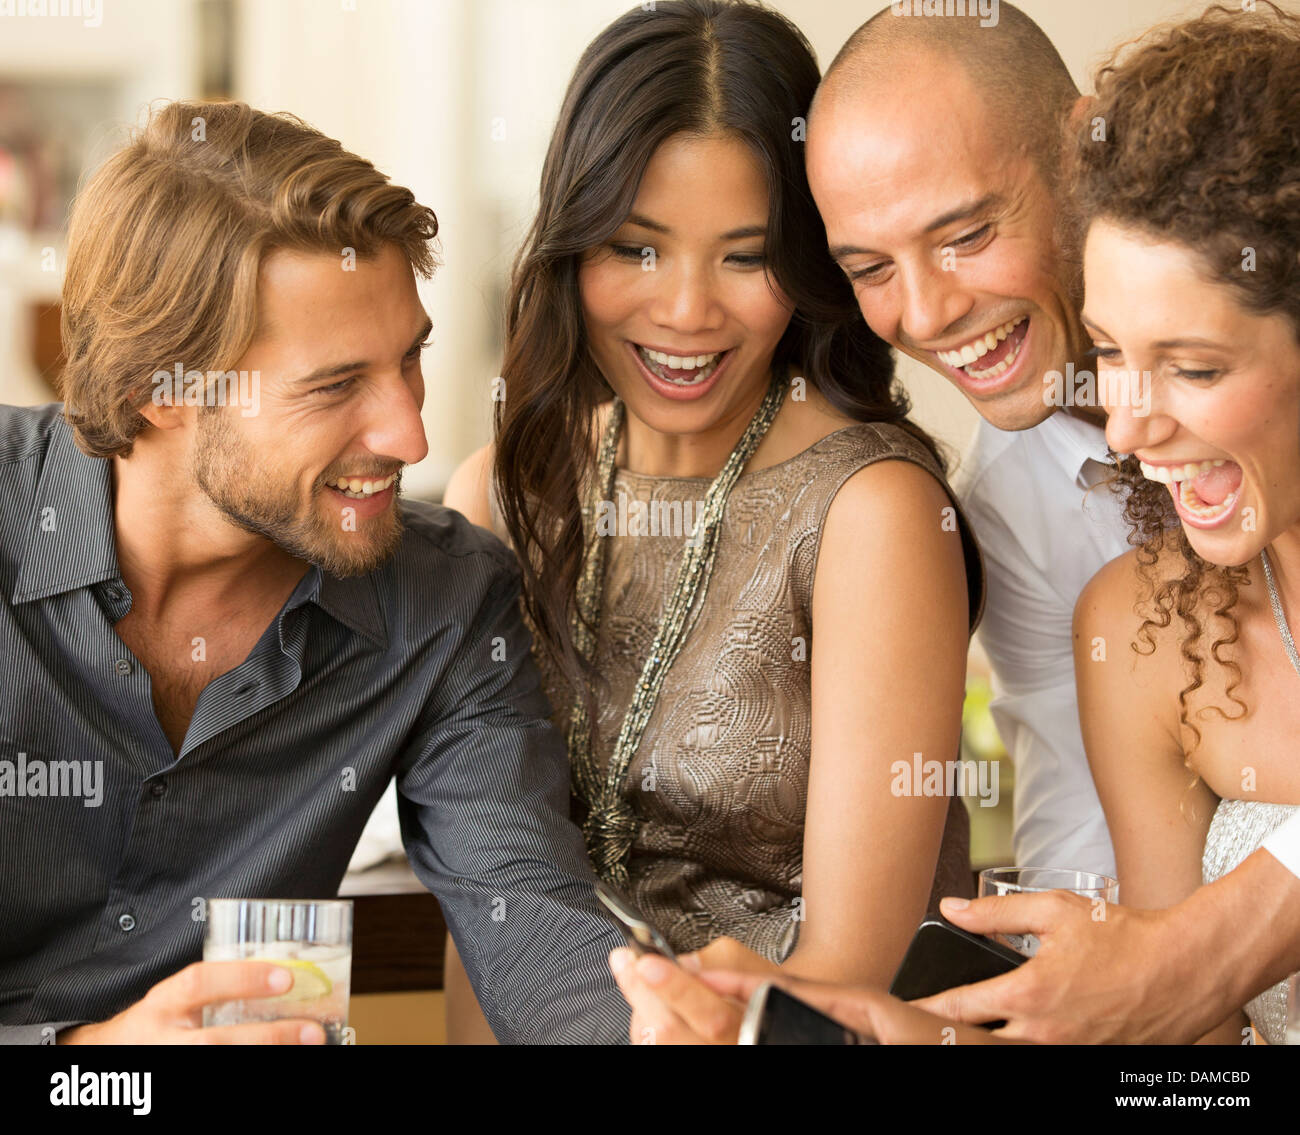 Friends using cell phones at party Stock Photo